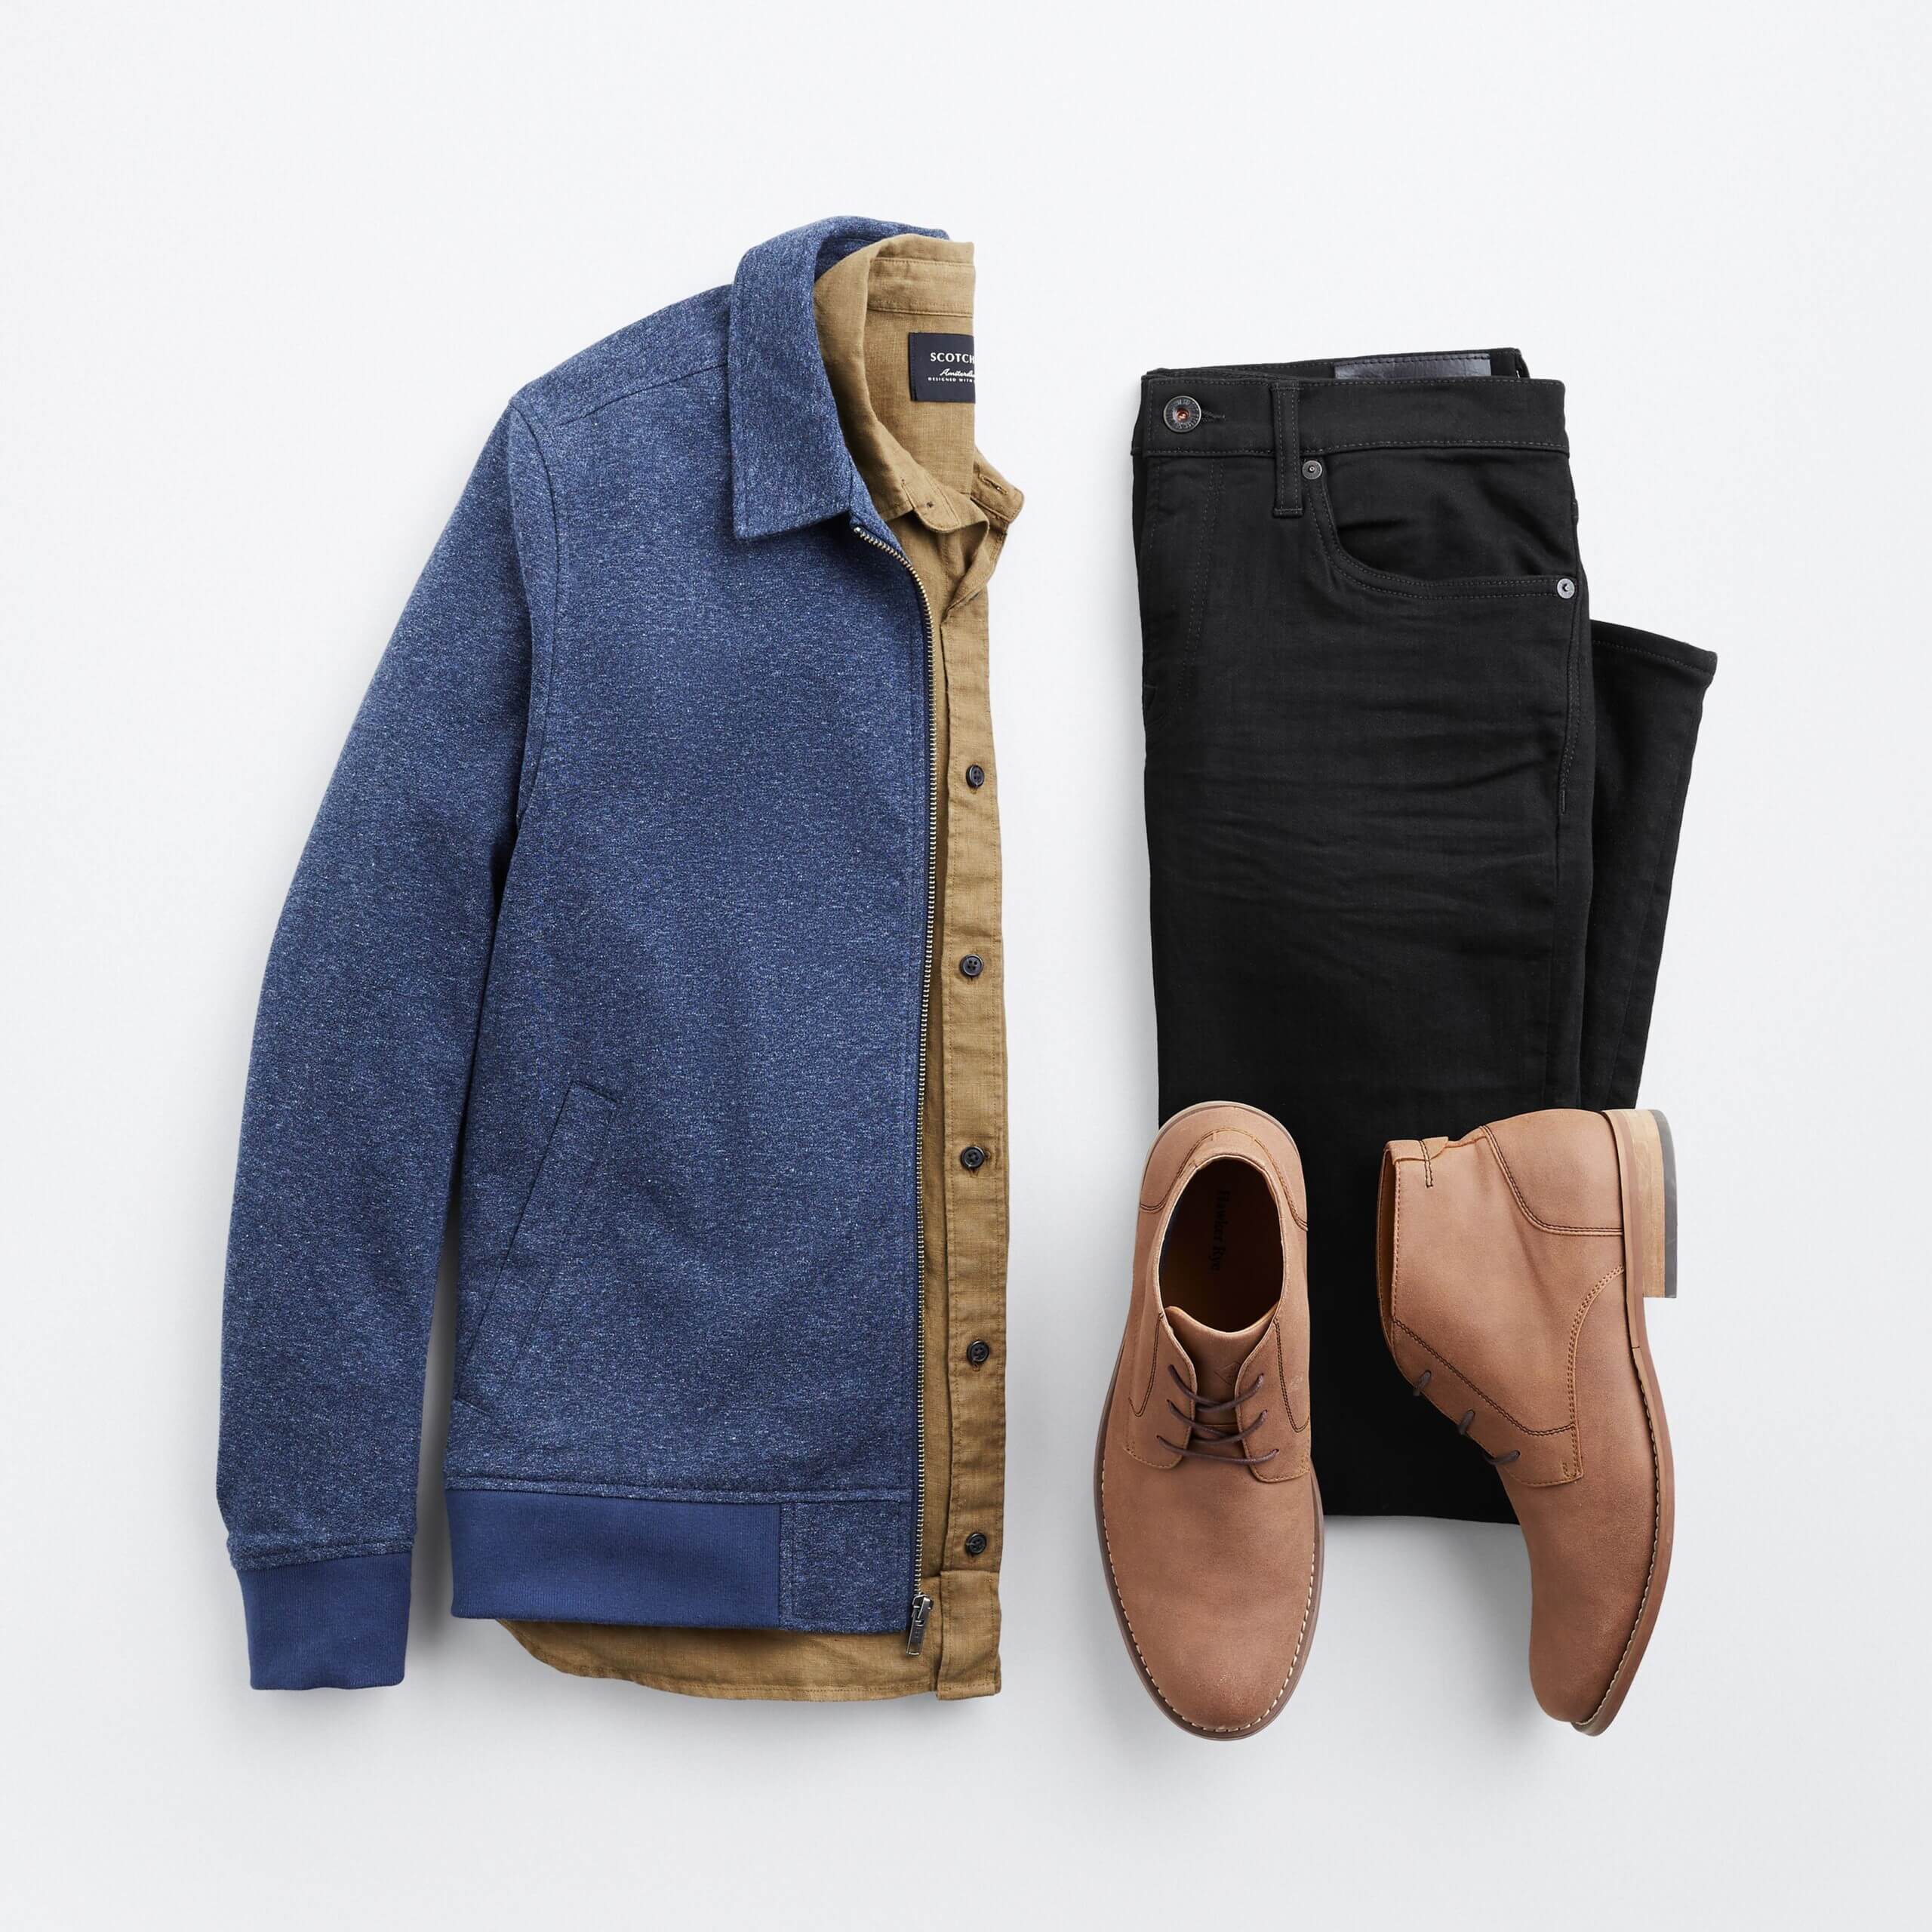 5 Ways To Switch Up Your Style This Fall | Stitch Fix Men